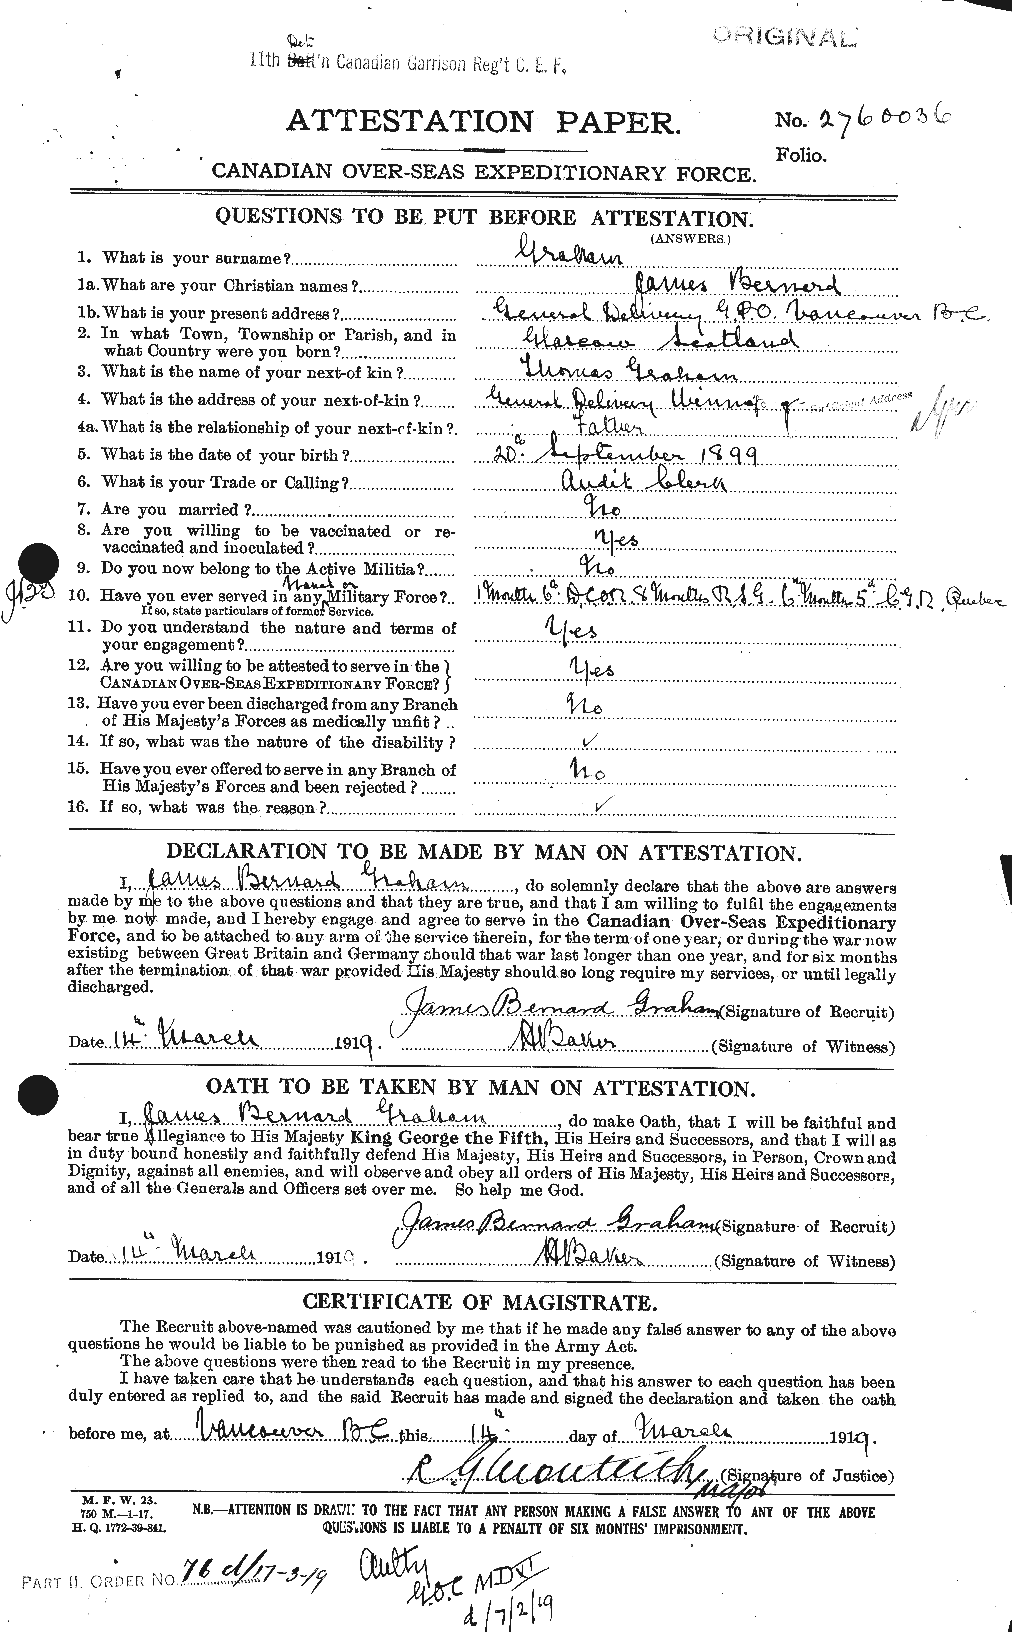 Personnel Records of the First World War - CEF 357806a